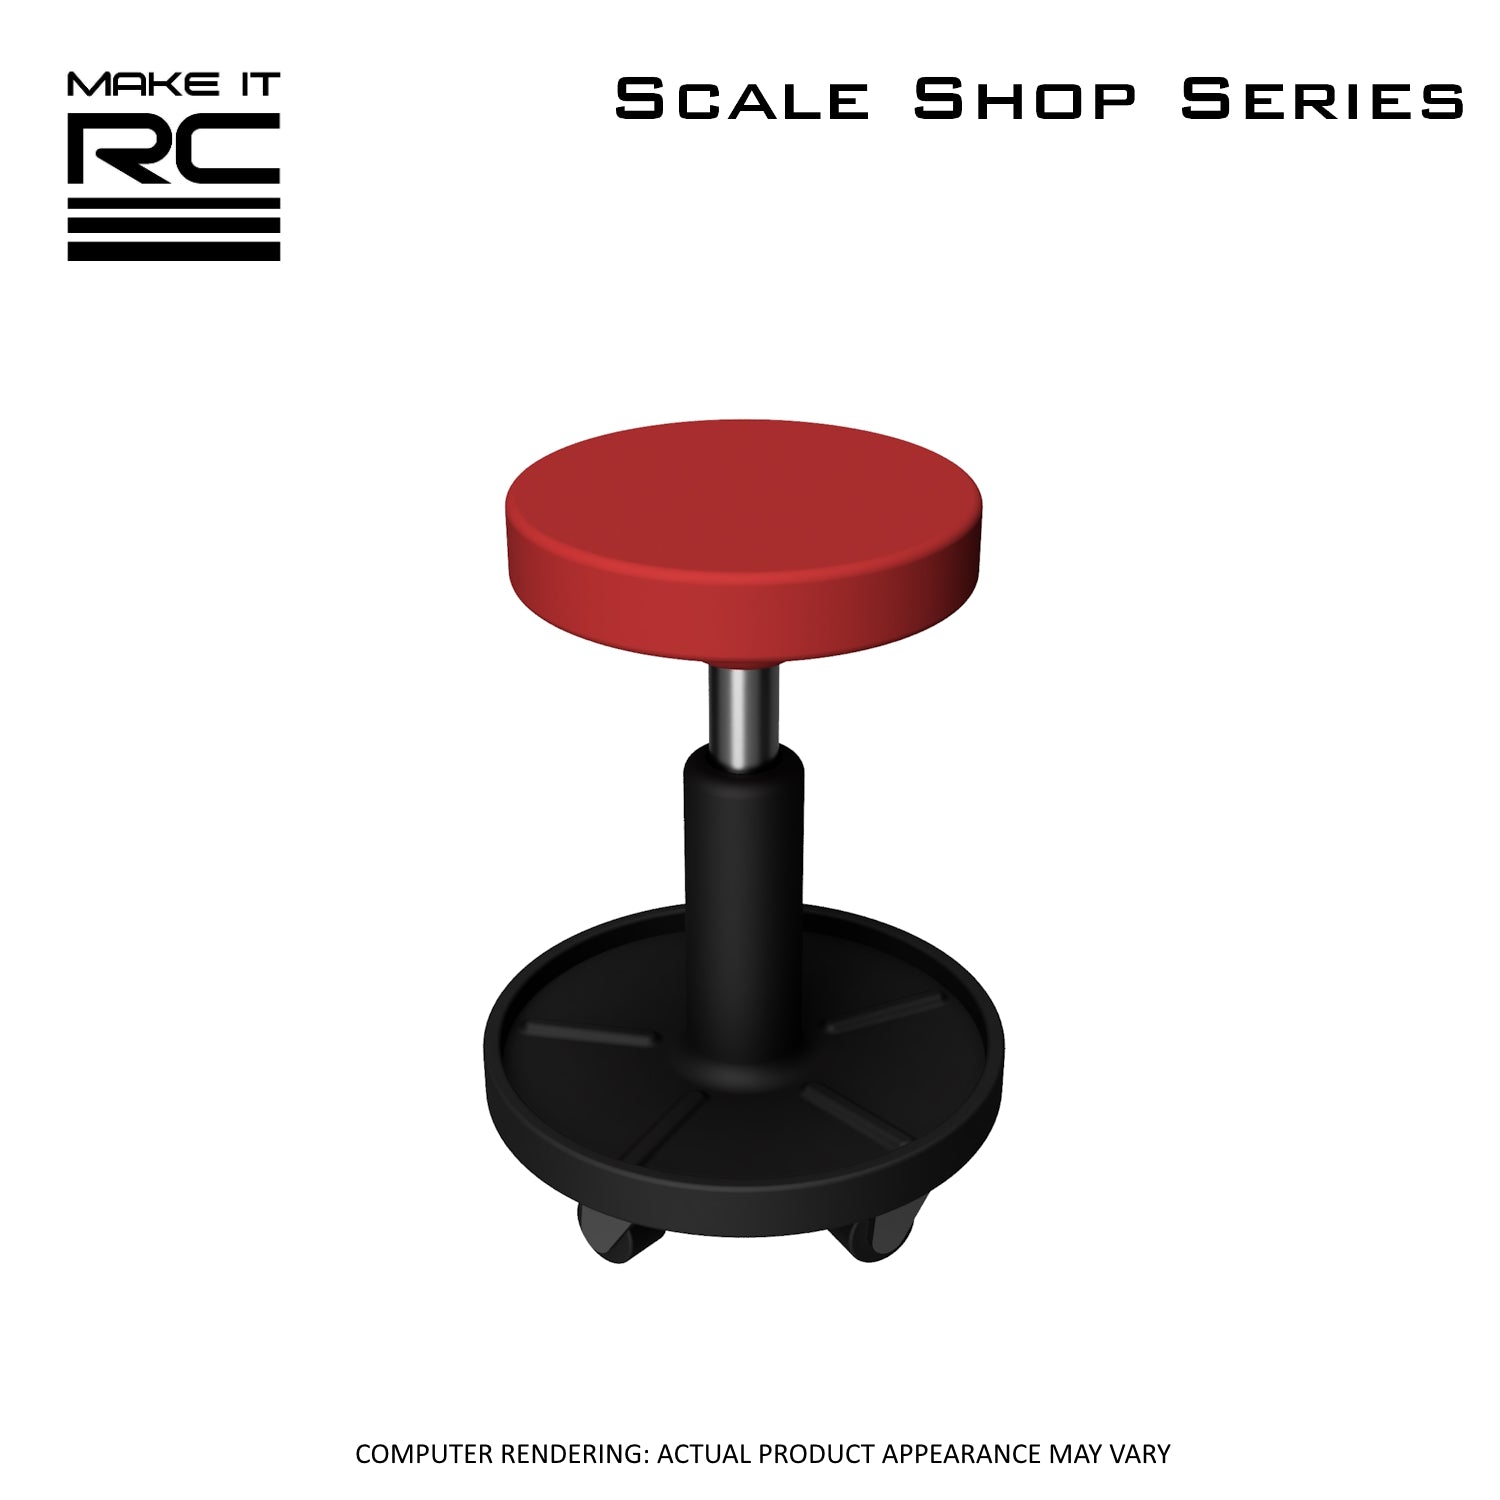 Make It RC 1/24 Scale Rolling Shop Stool (Set of 2)